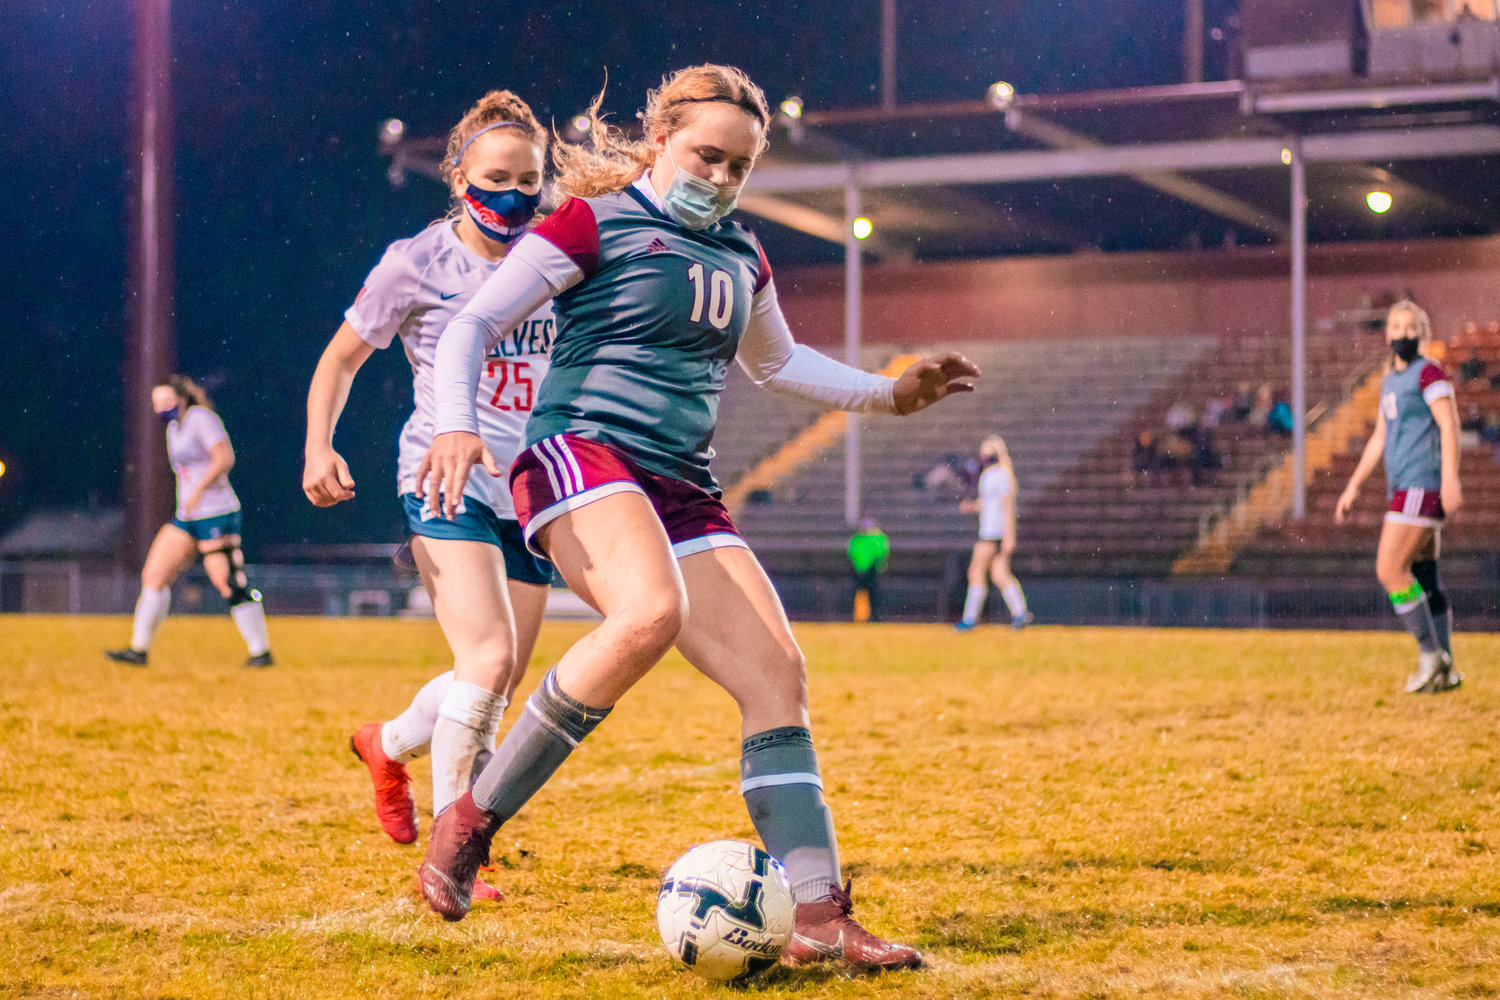 FILE PHOTO: Bearcat’s Lauren Tornow (10) takes control of the ball during a game in Chehalis.